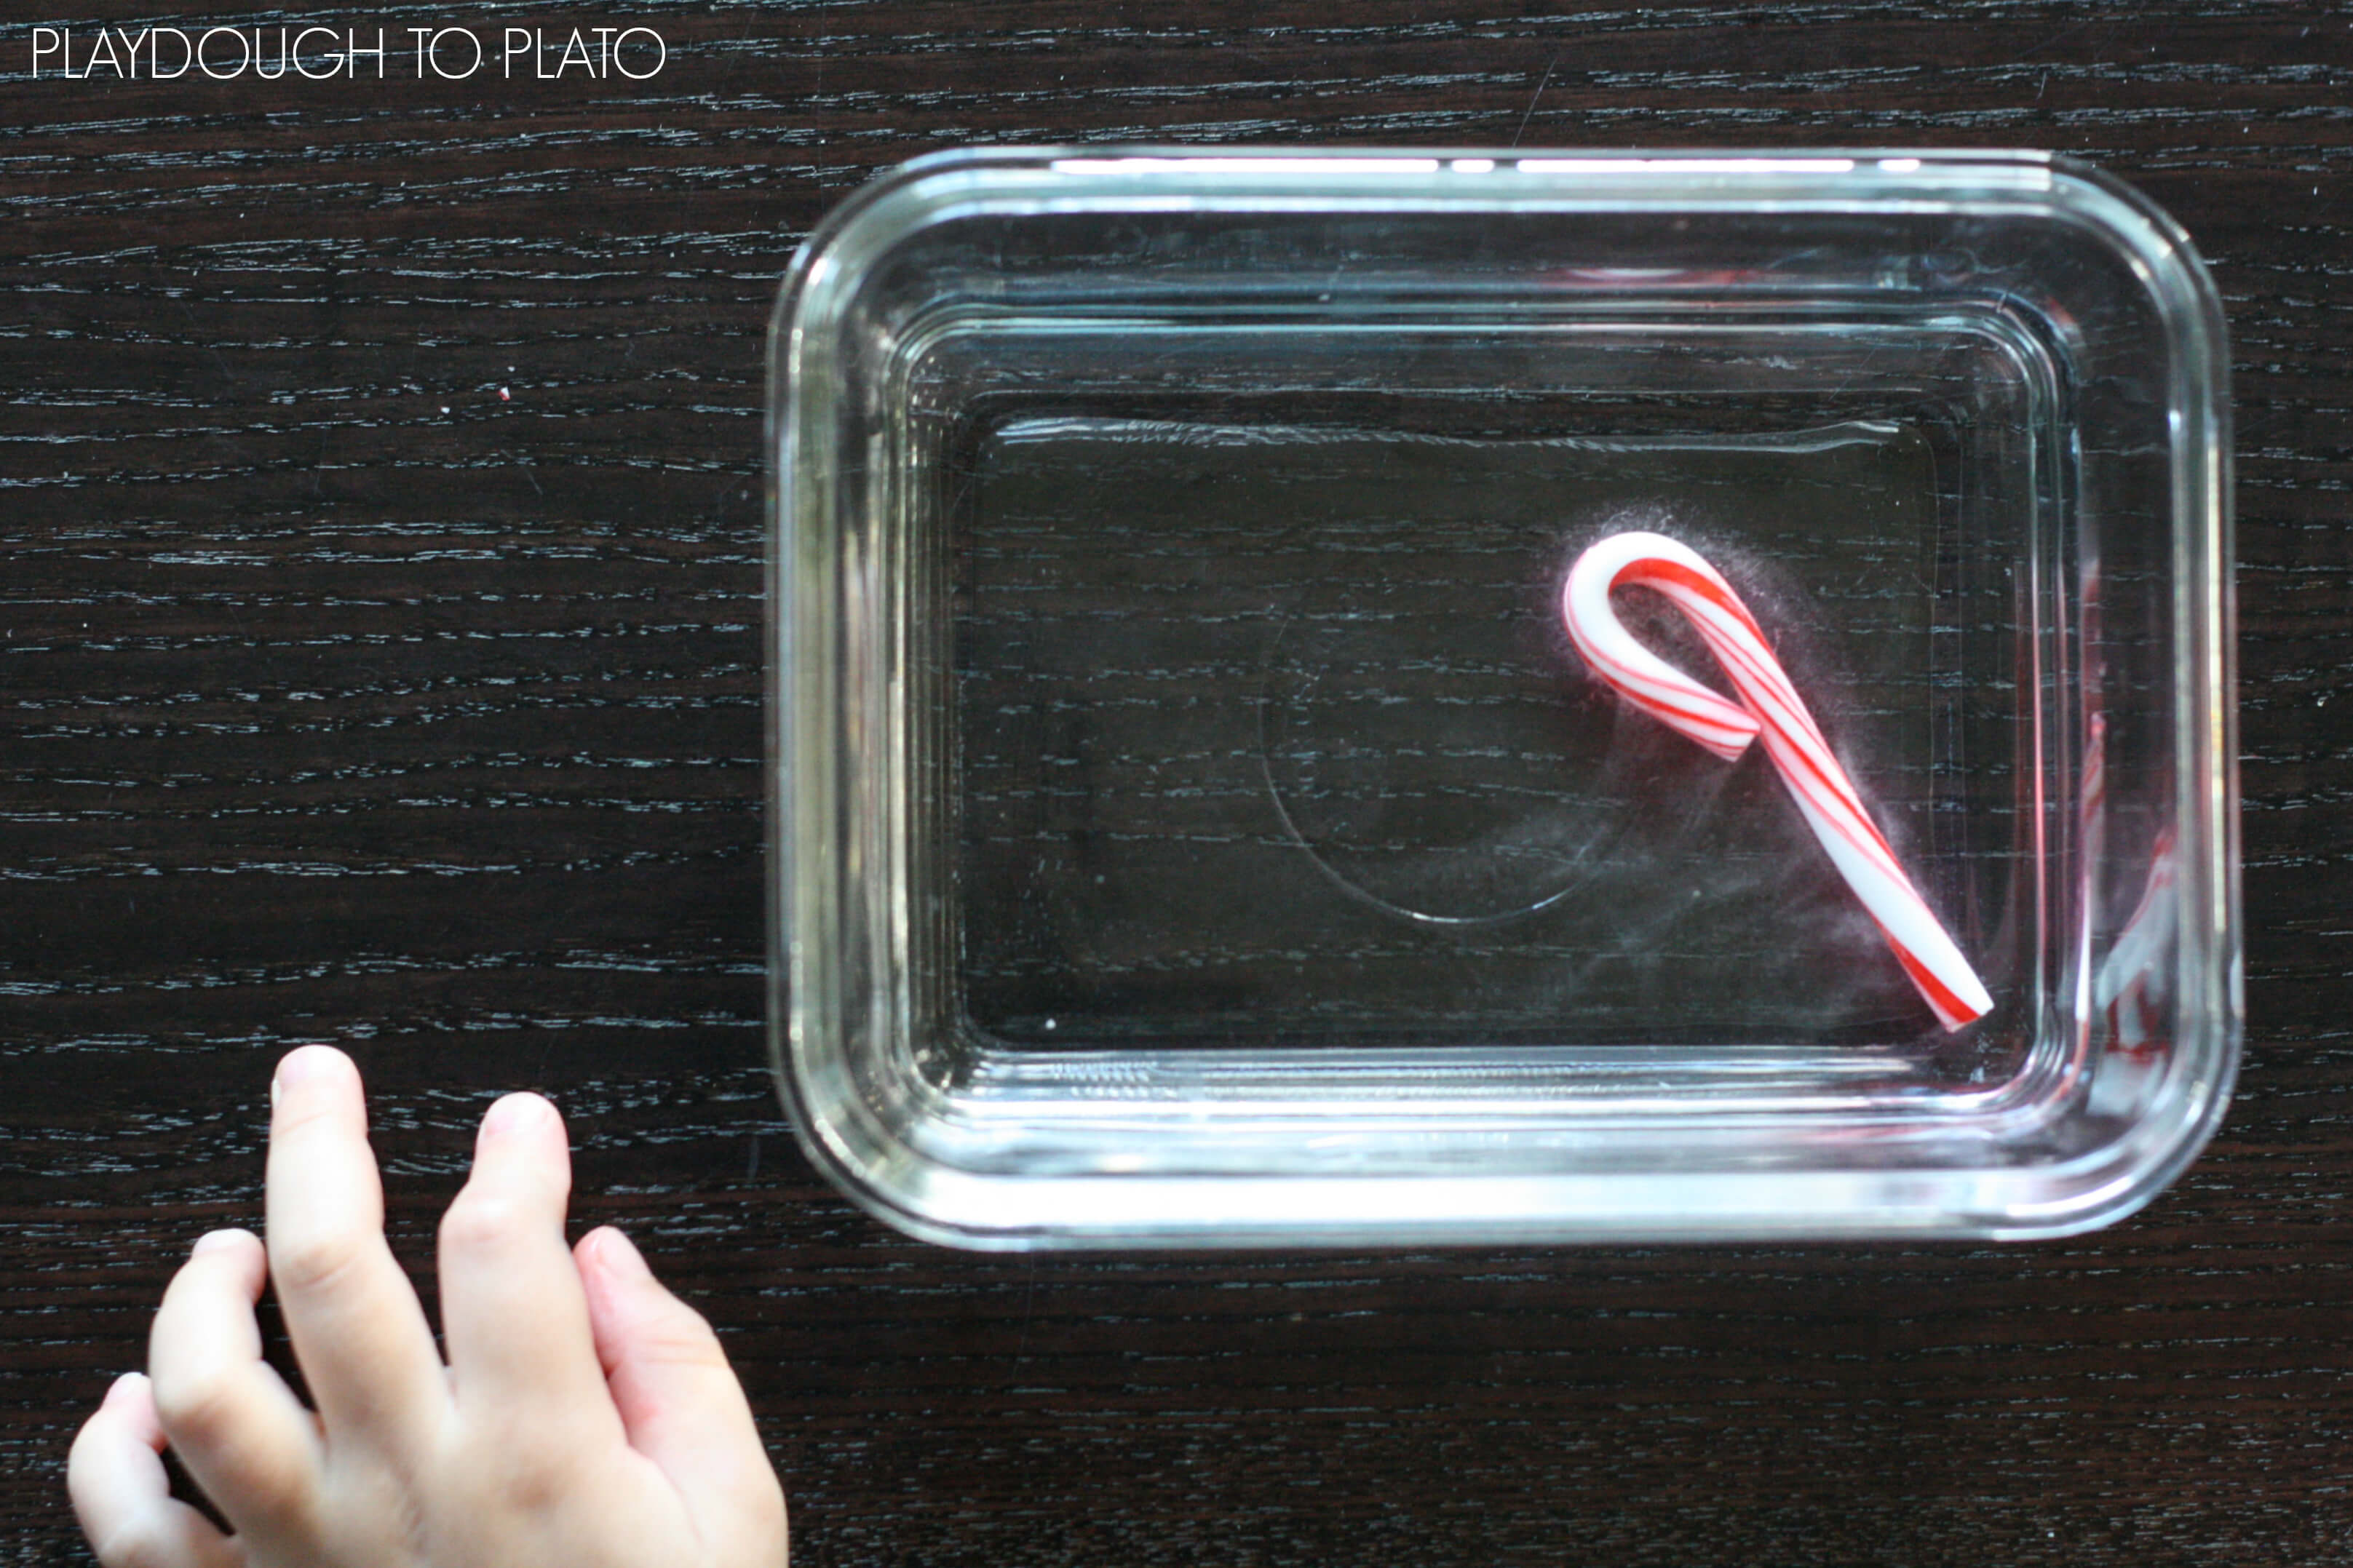 Easy kids science! Make candy cane stripes disappear.